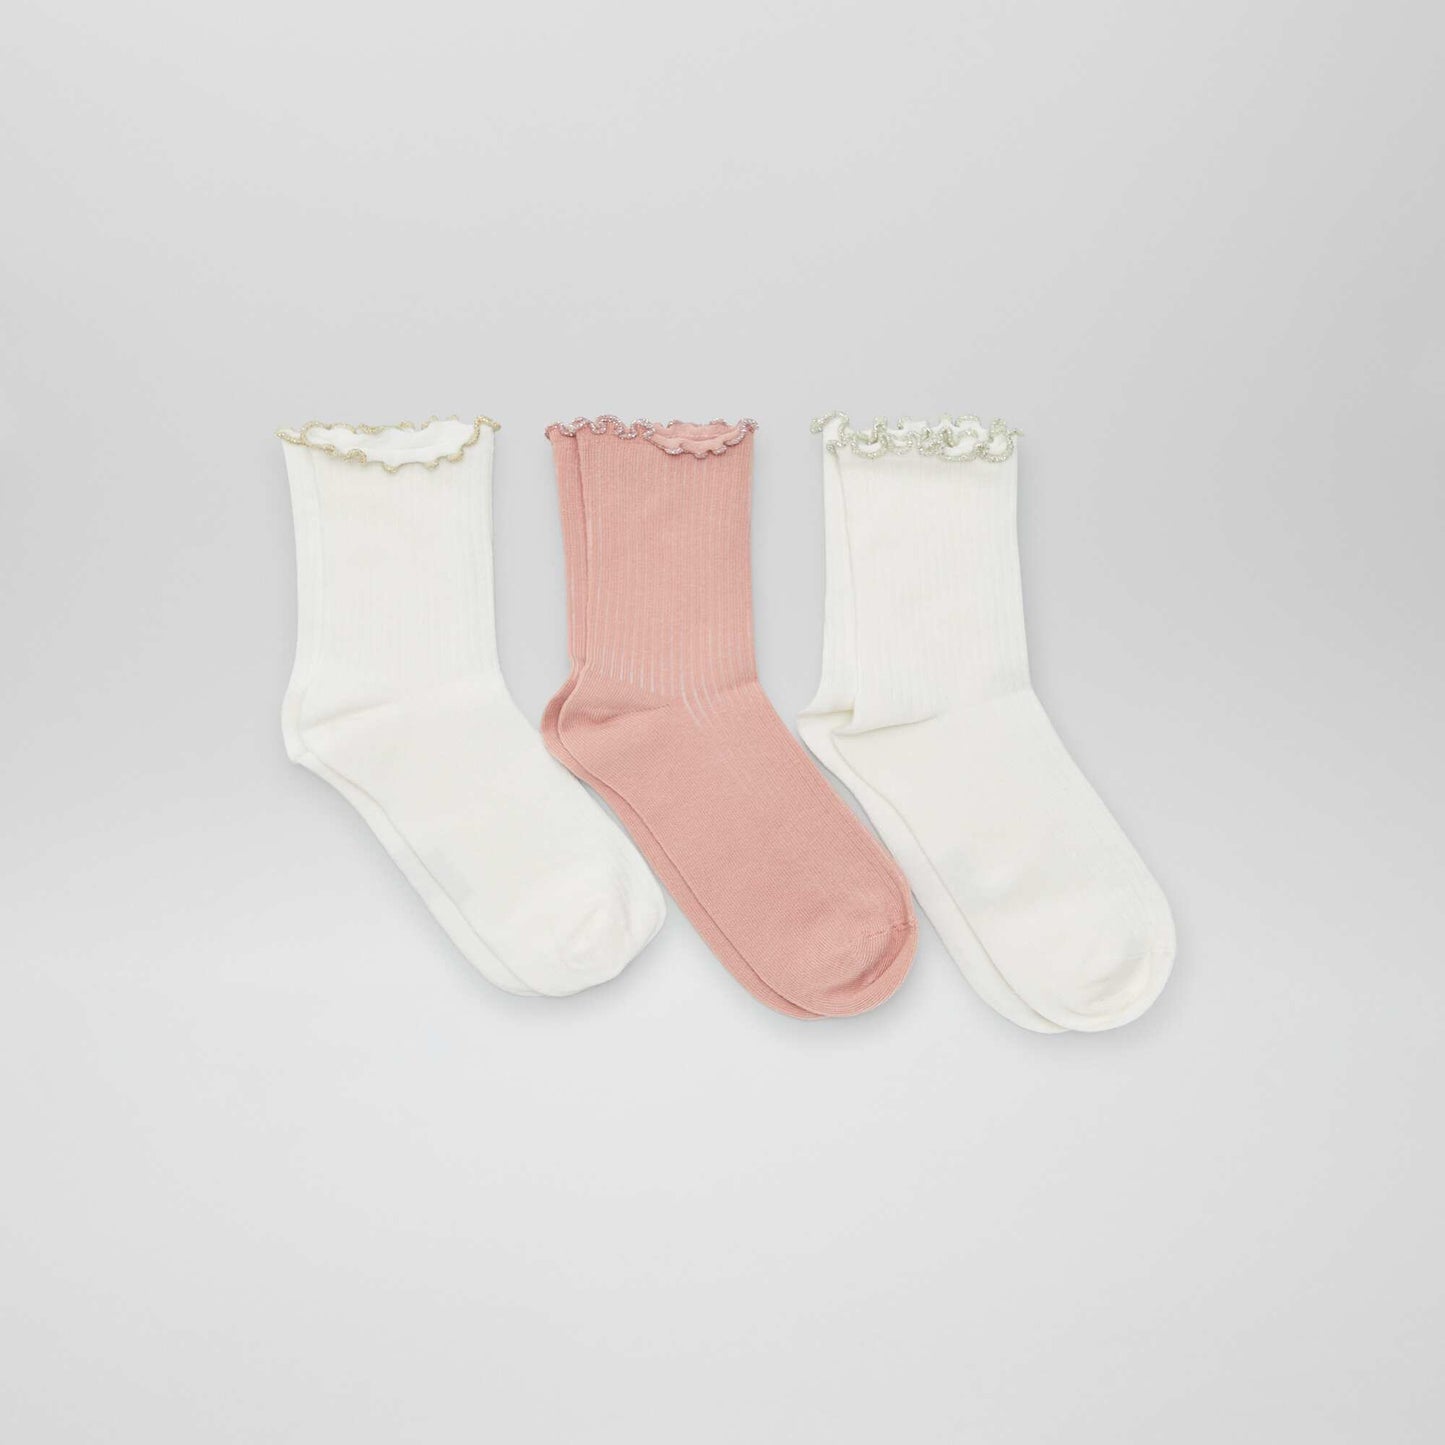 Pack of 3 pairs of scalloped socks PINK